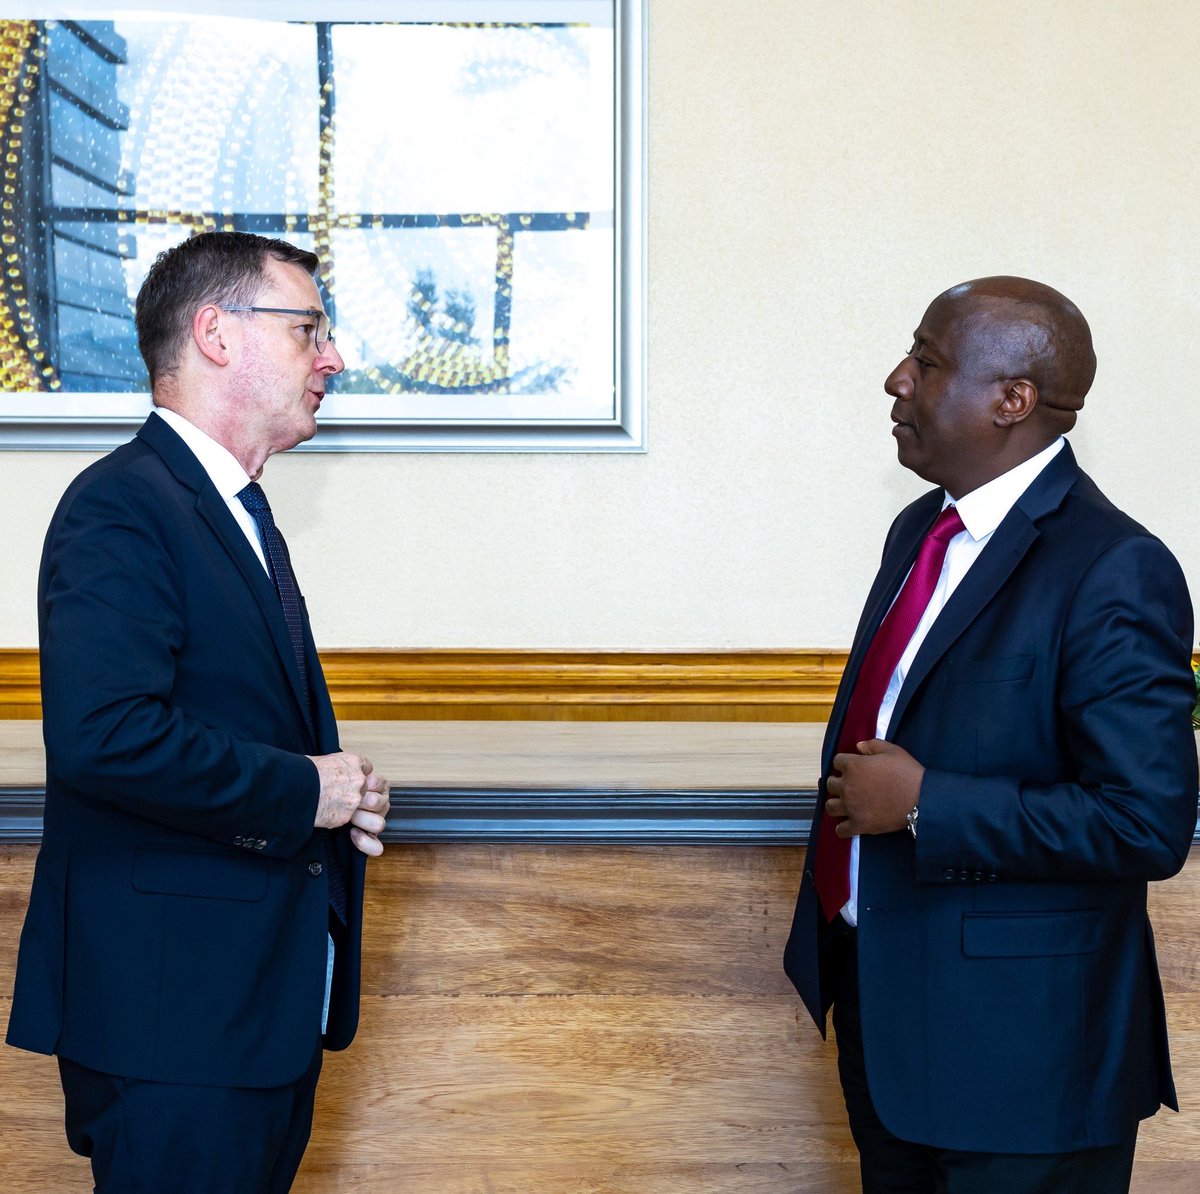 PHOTOS: Prime Minister Edouard Ngirente on Friday met with Sérgio Pimenta, the IFC Regional Vice President for the Middle East and Africa. They discussed about the progress of the projects funded by the company in #Rwanda.